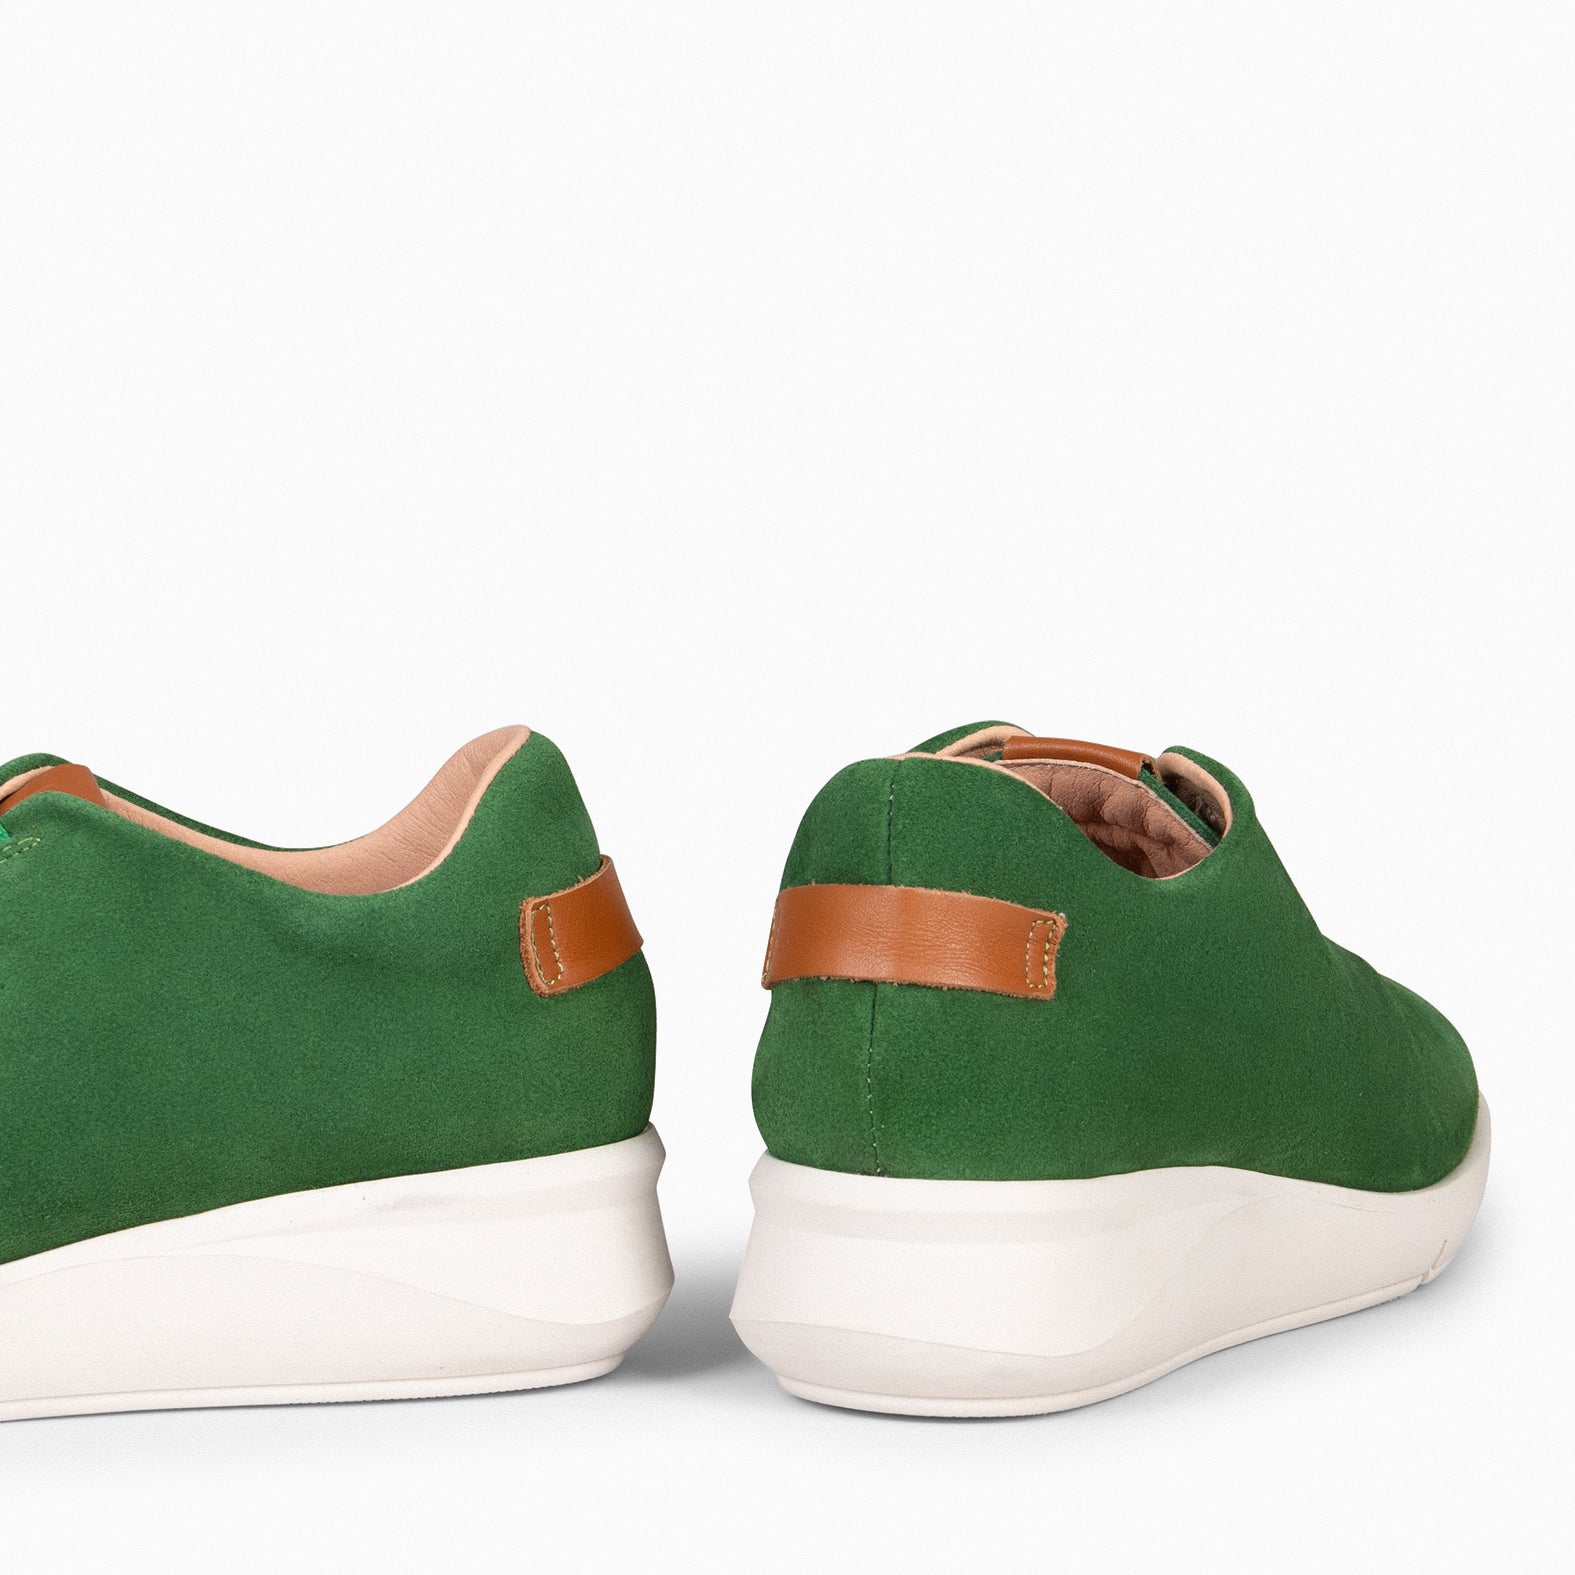 FLY – GREEN casual sneaker with elastic laces